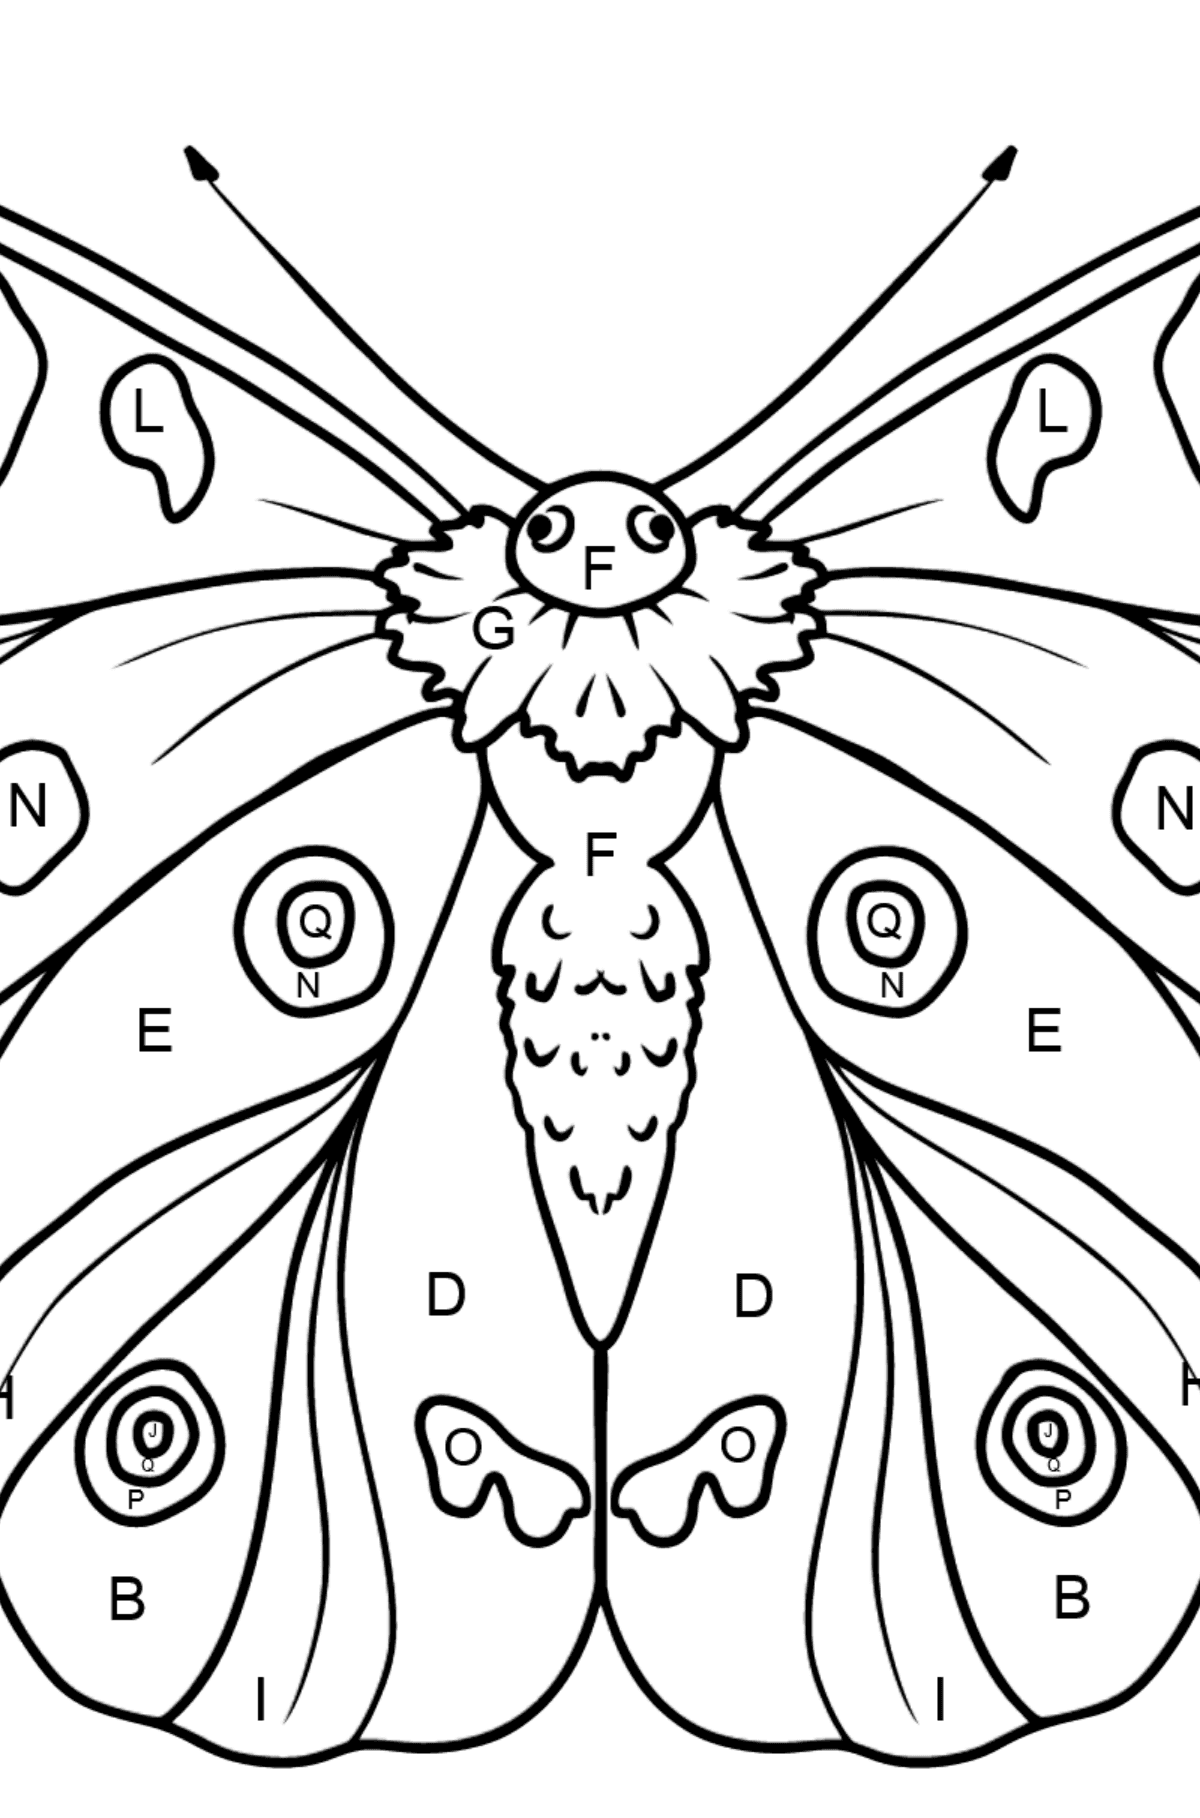 Apollo Butterfly coloring page - Coloring by Letters for Kids